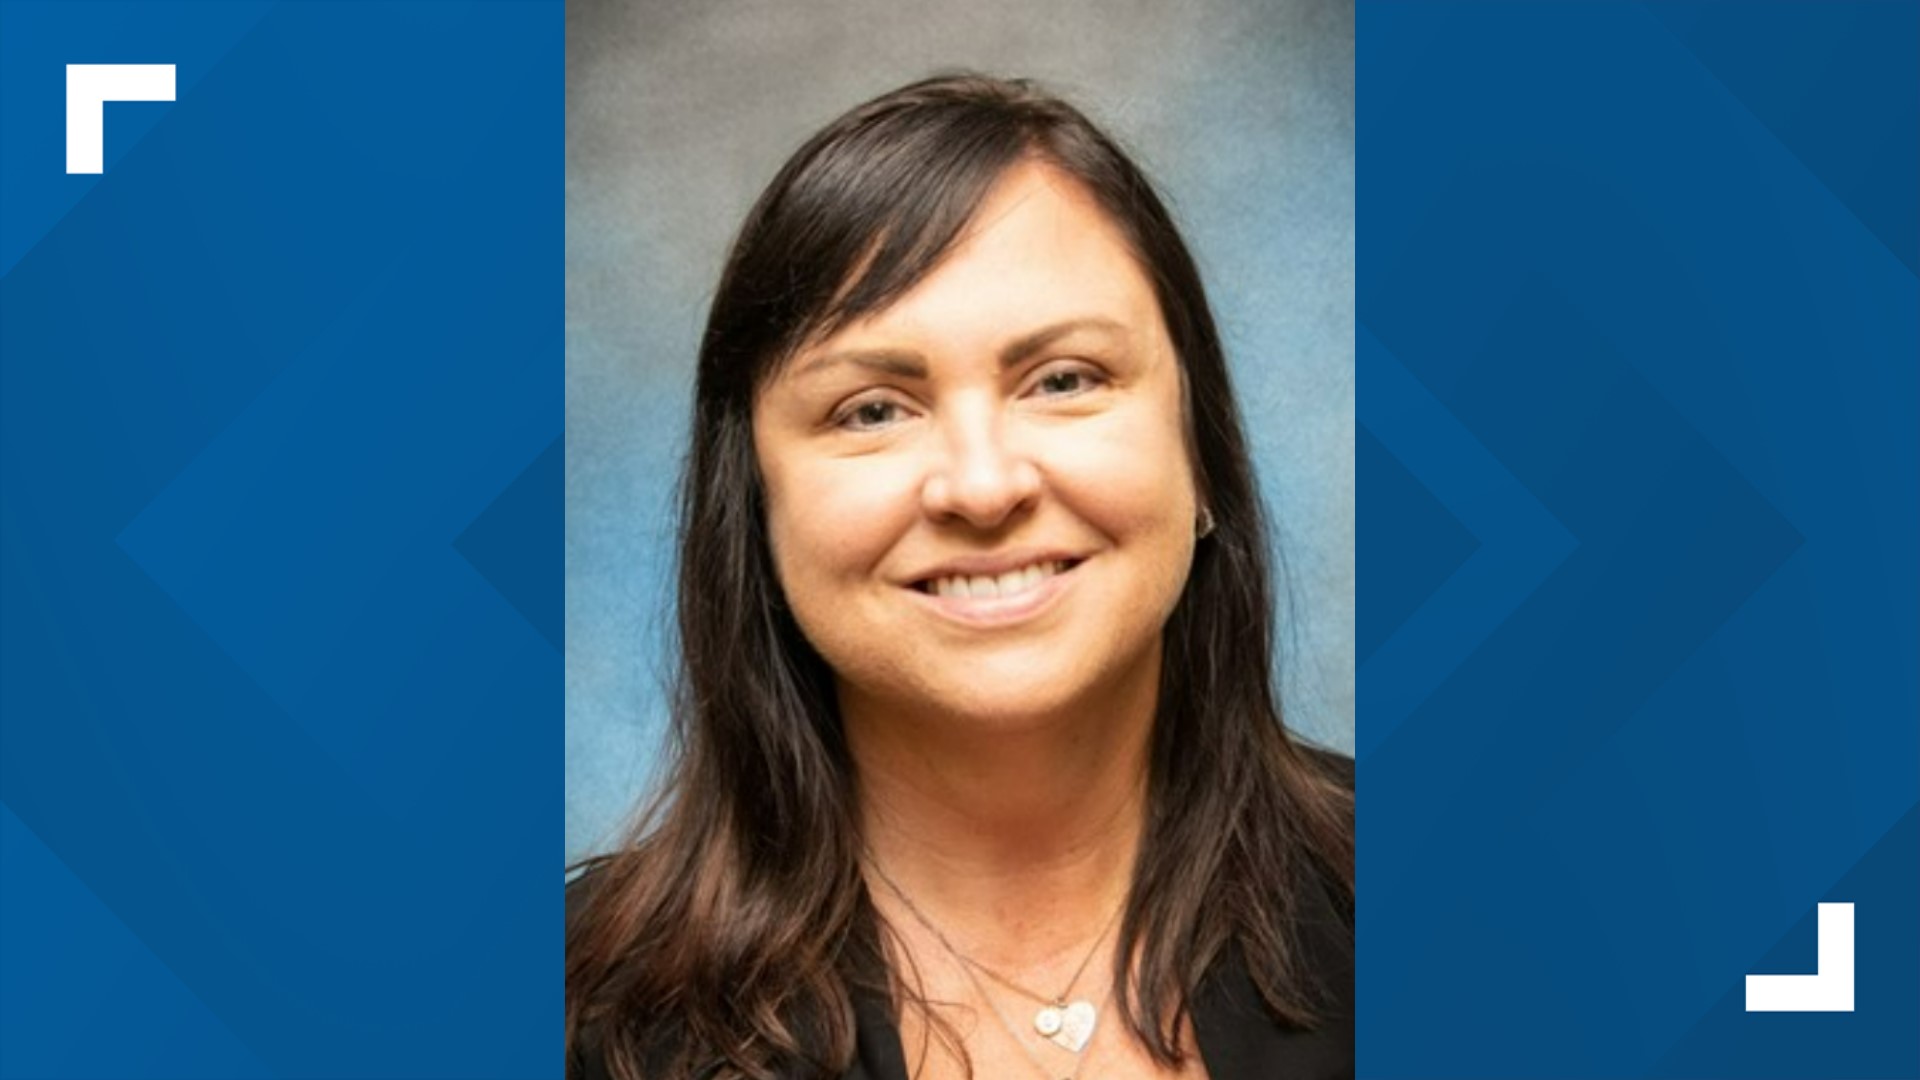 During a special meeting held this evening, the Westerville City Schools Board of Education identified Angela S. Hamberg as the district’s Interim Superintendent.